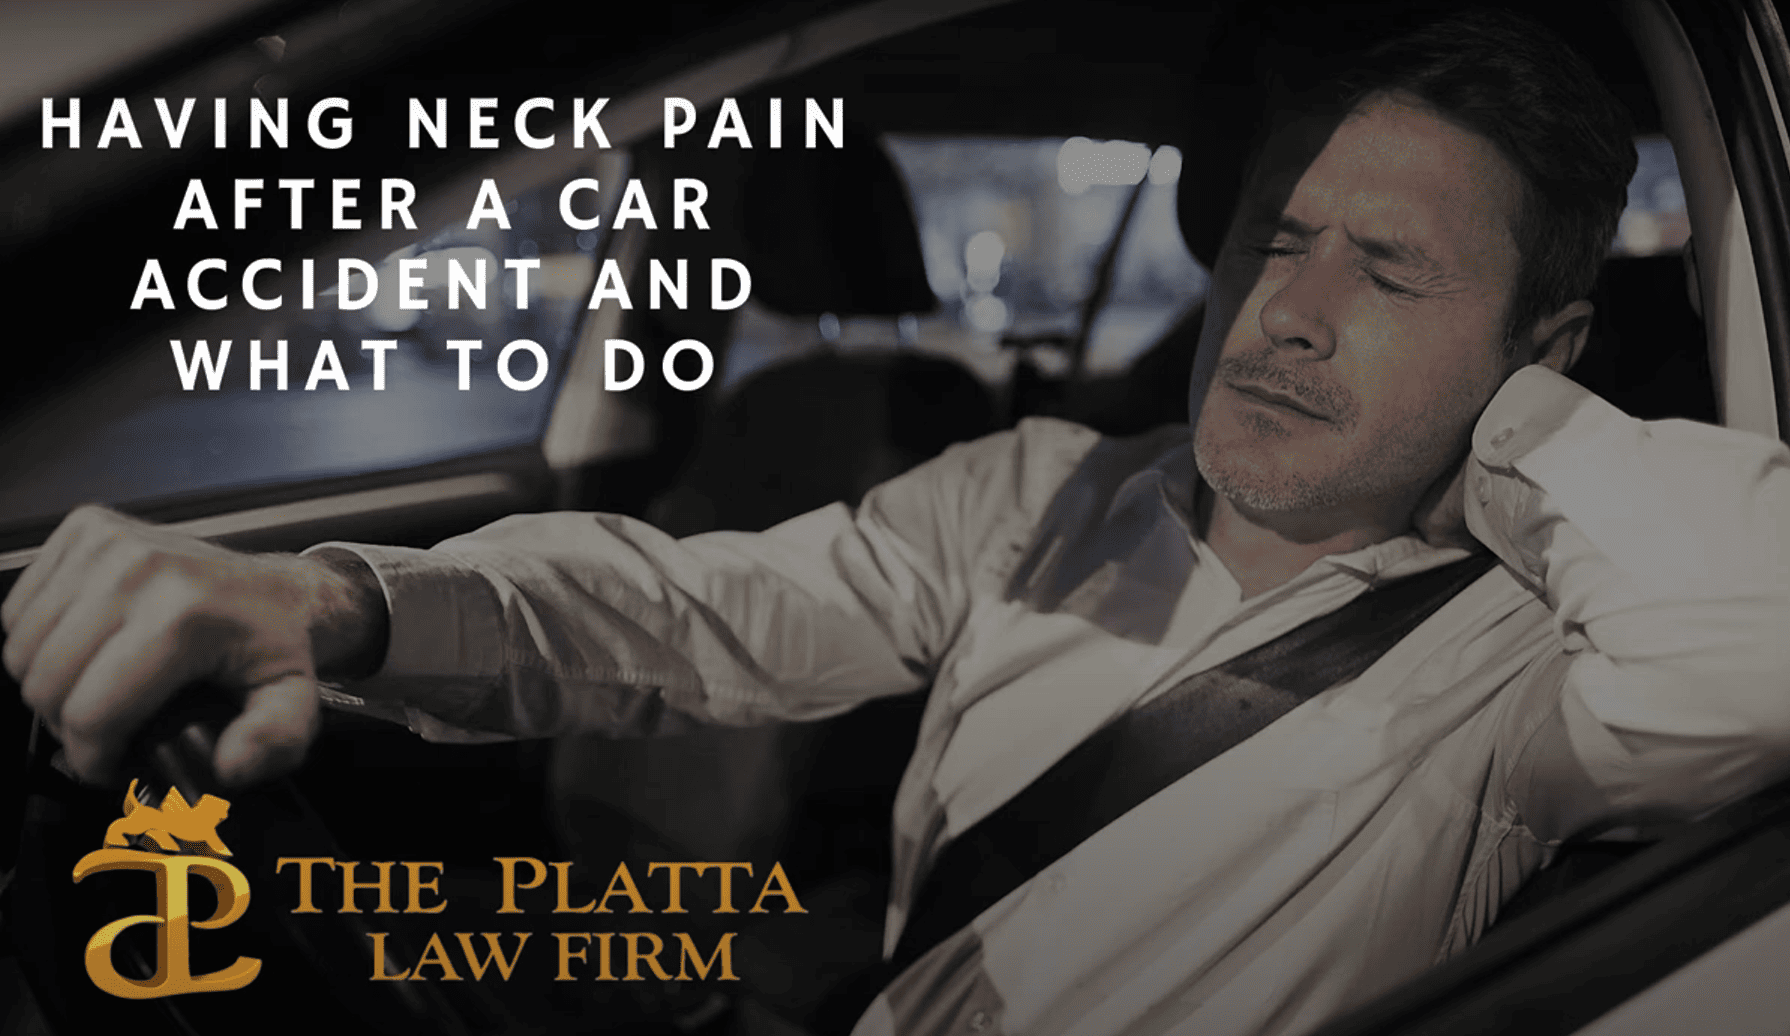 HAVING NECK PAIN AFTER A CAR ACCIDENT AND WHAT TO DO Post